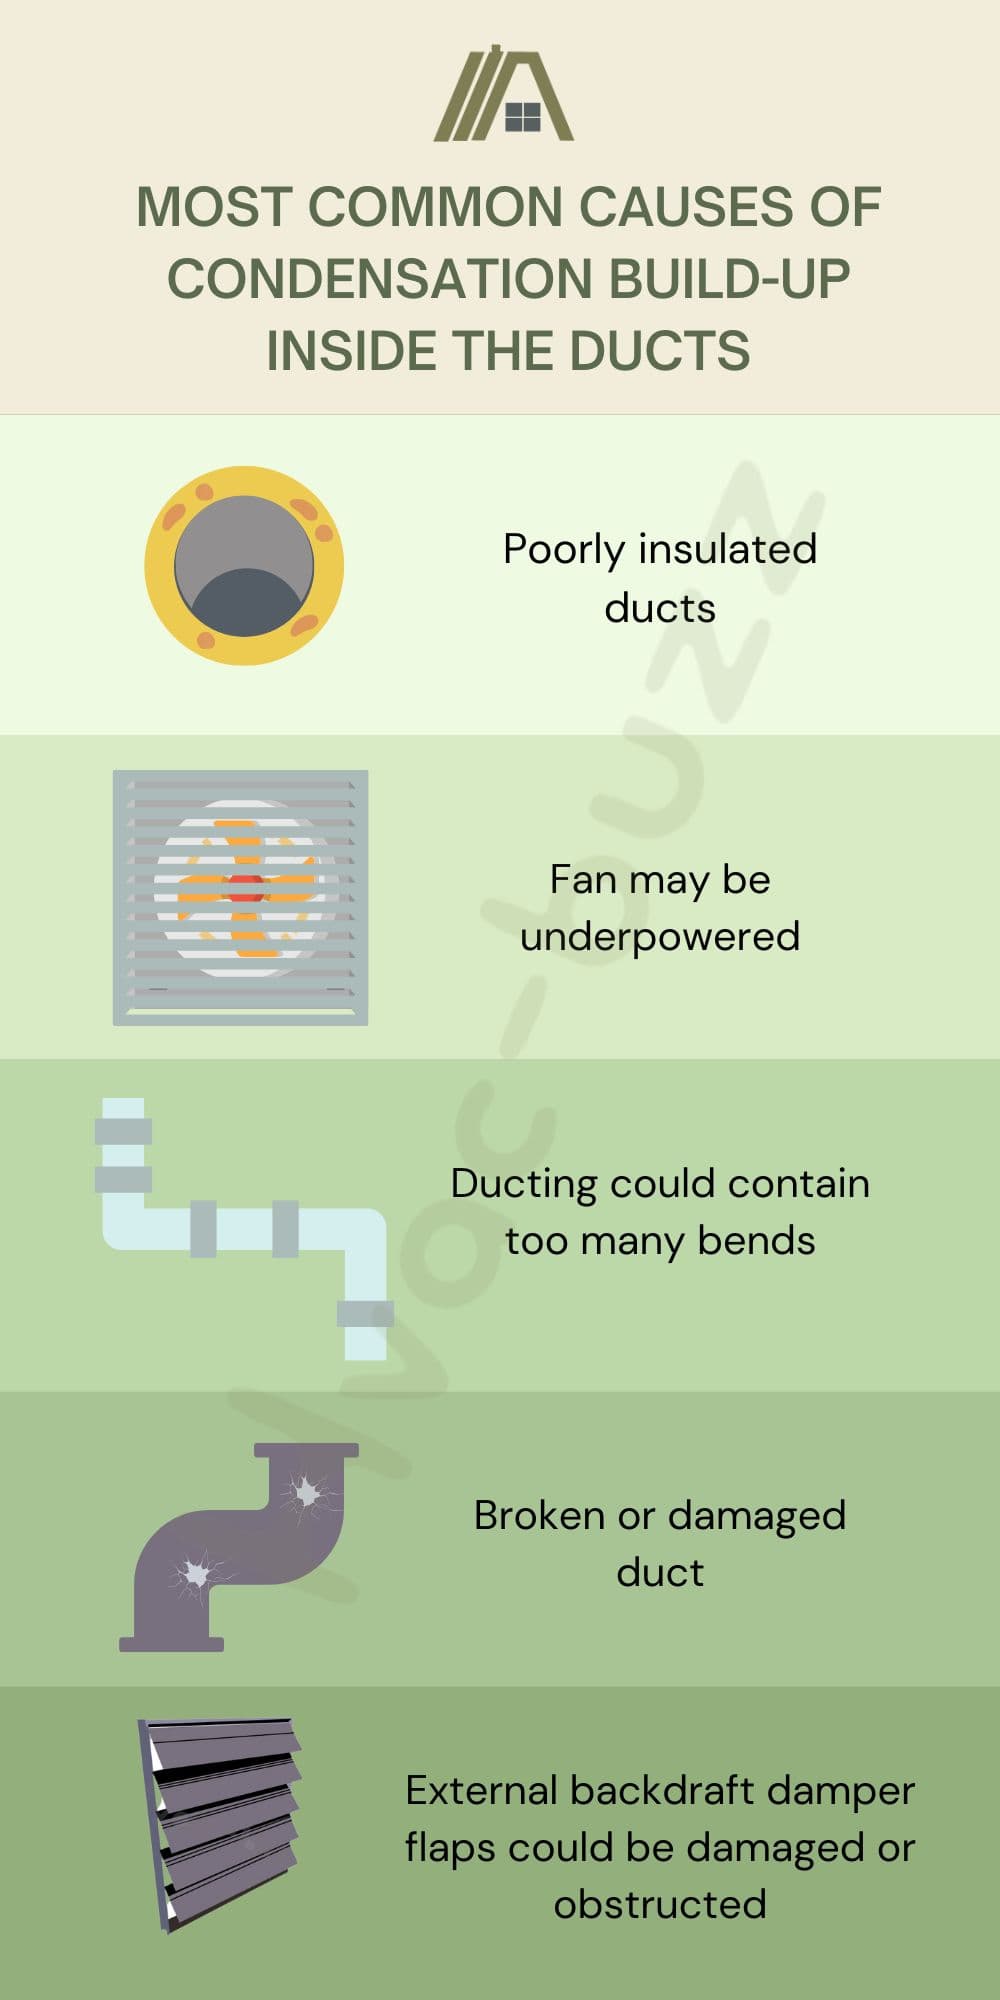 Most common causes of condensation build-up inside the ducts